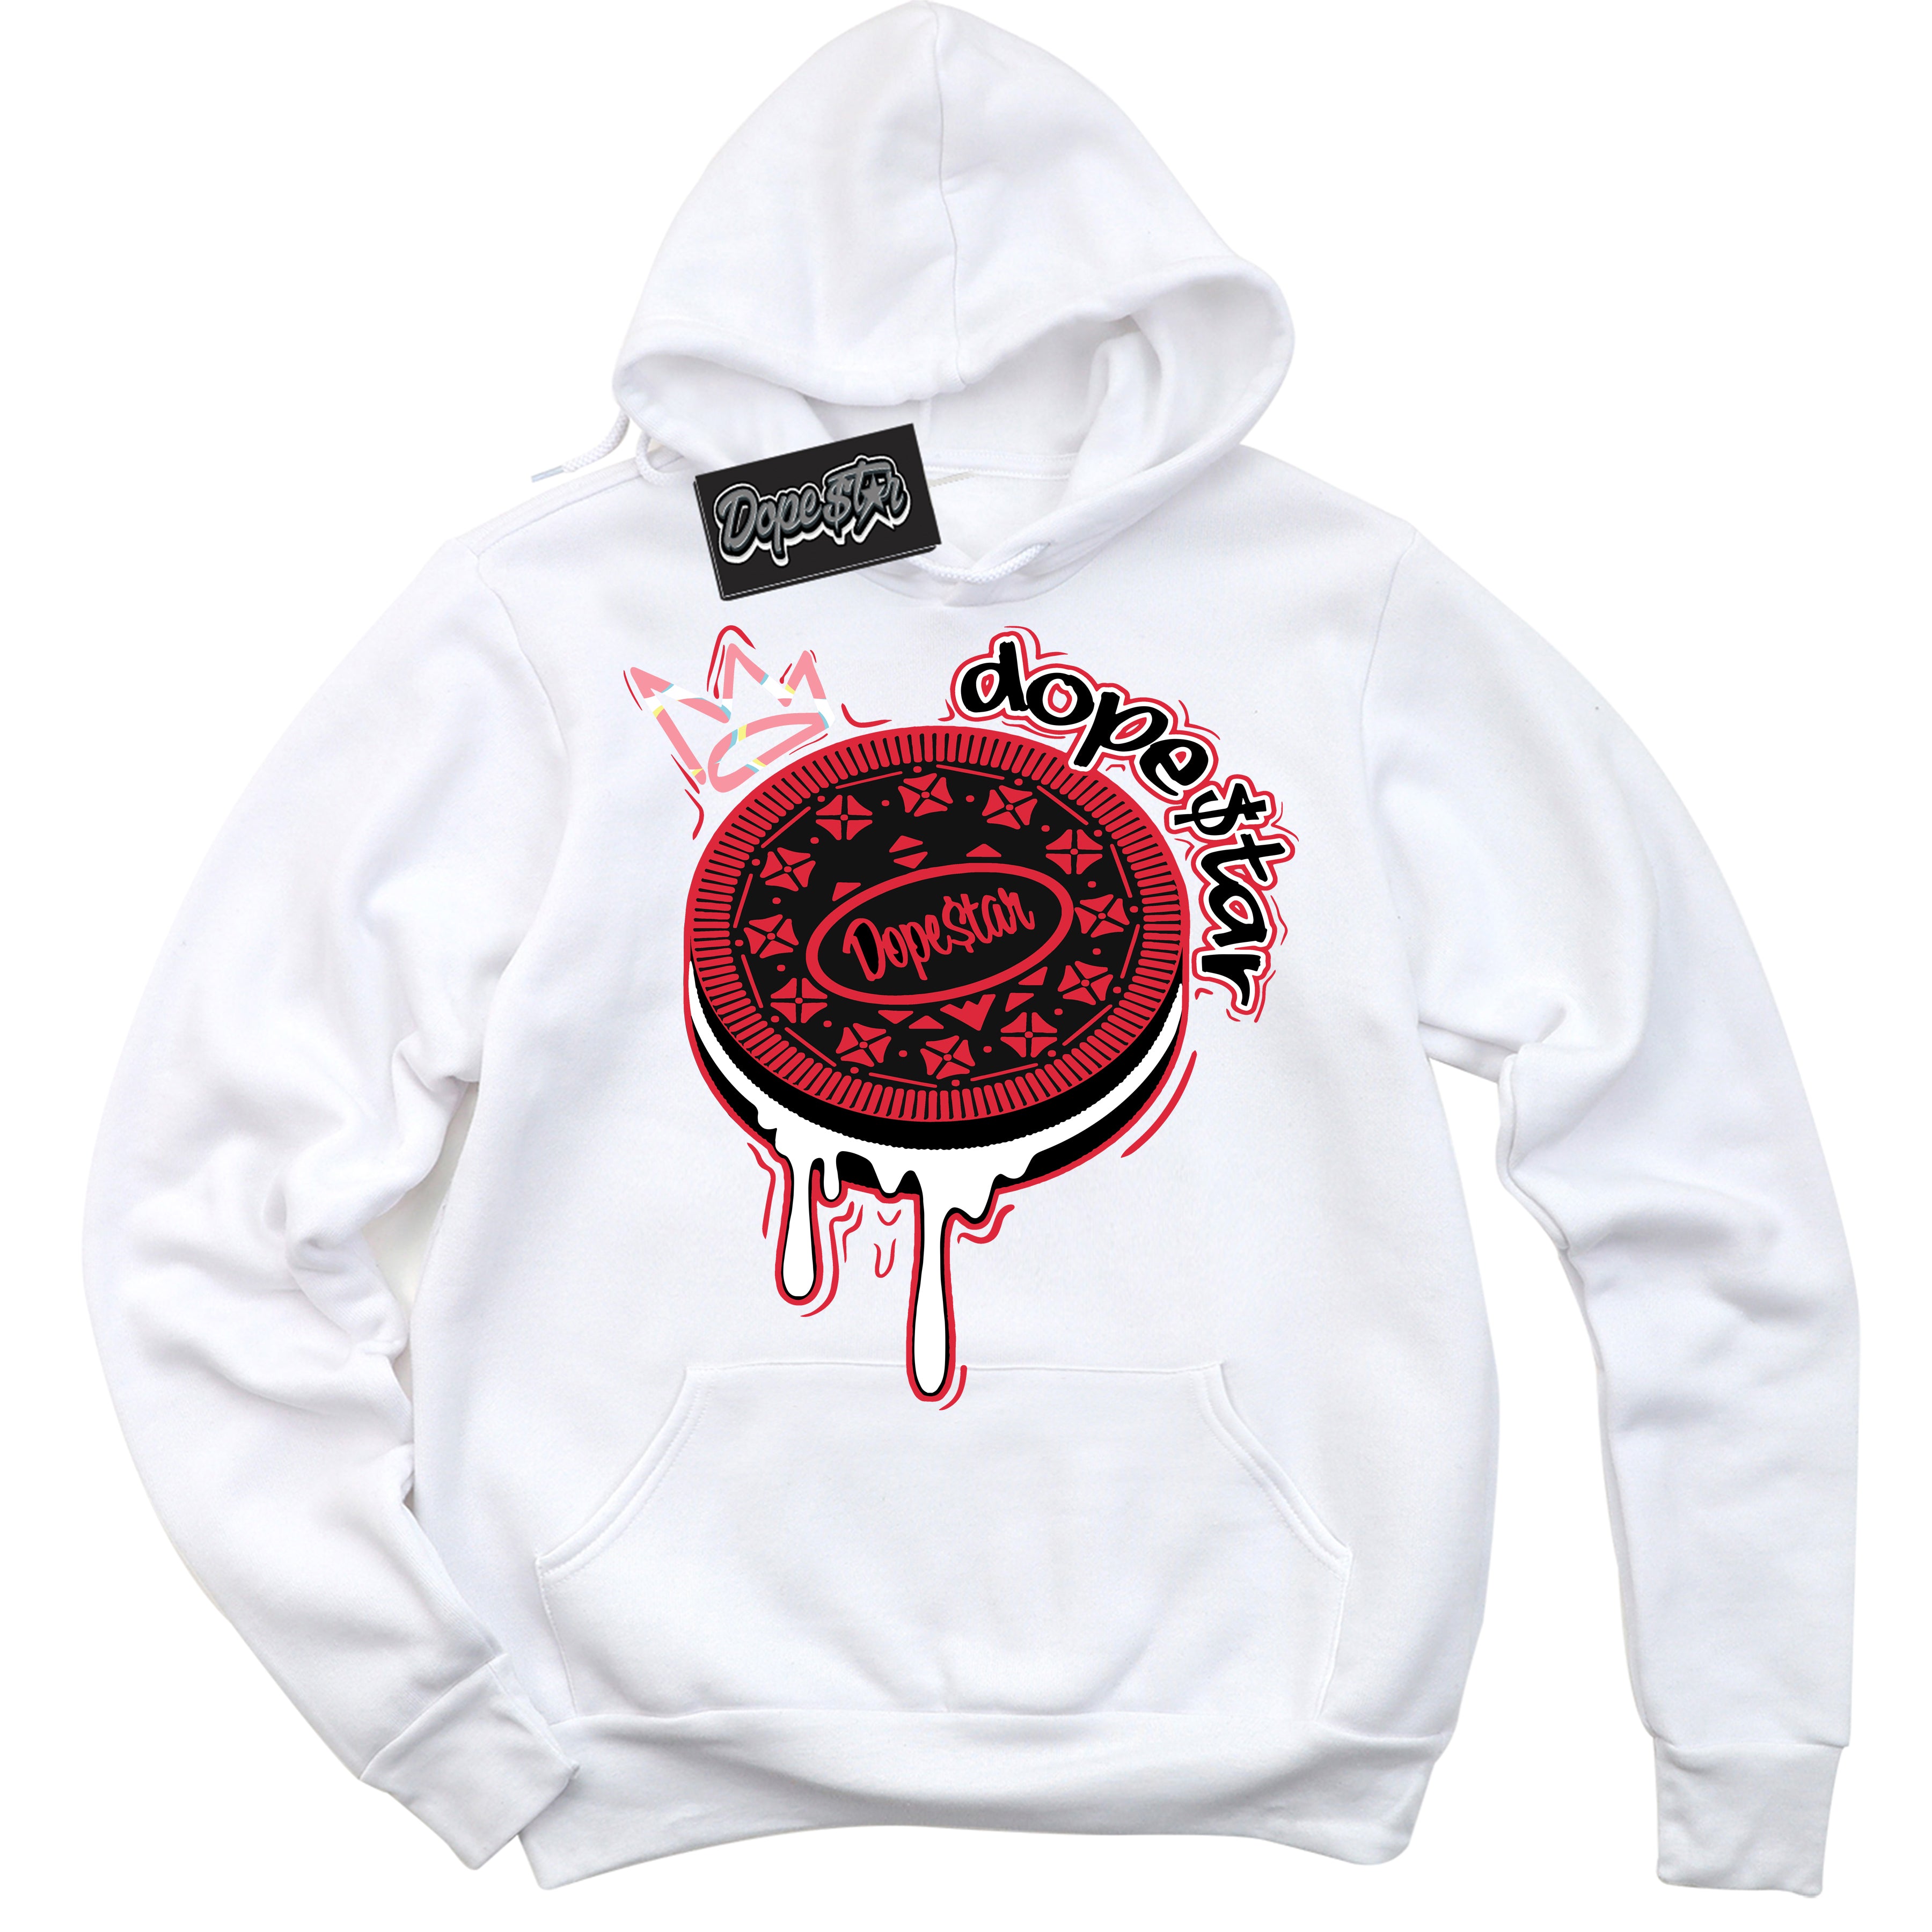 Cool White Graphic DopeStar Hoodie with “ Oreo DS “ print, that perfectly matches Spider-Verse 1s sneakers